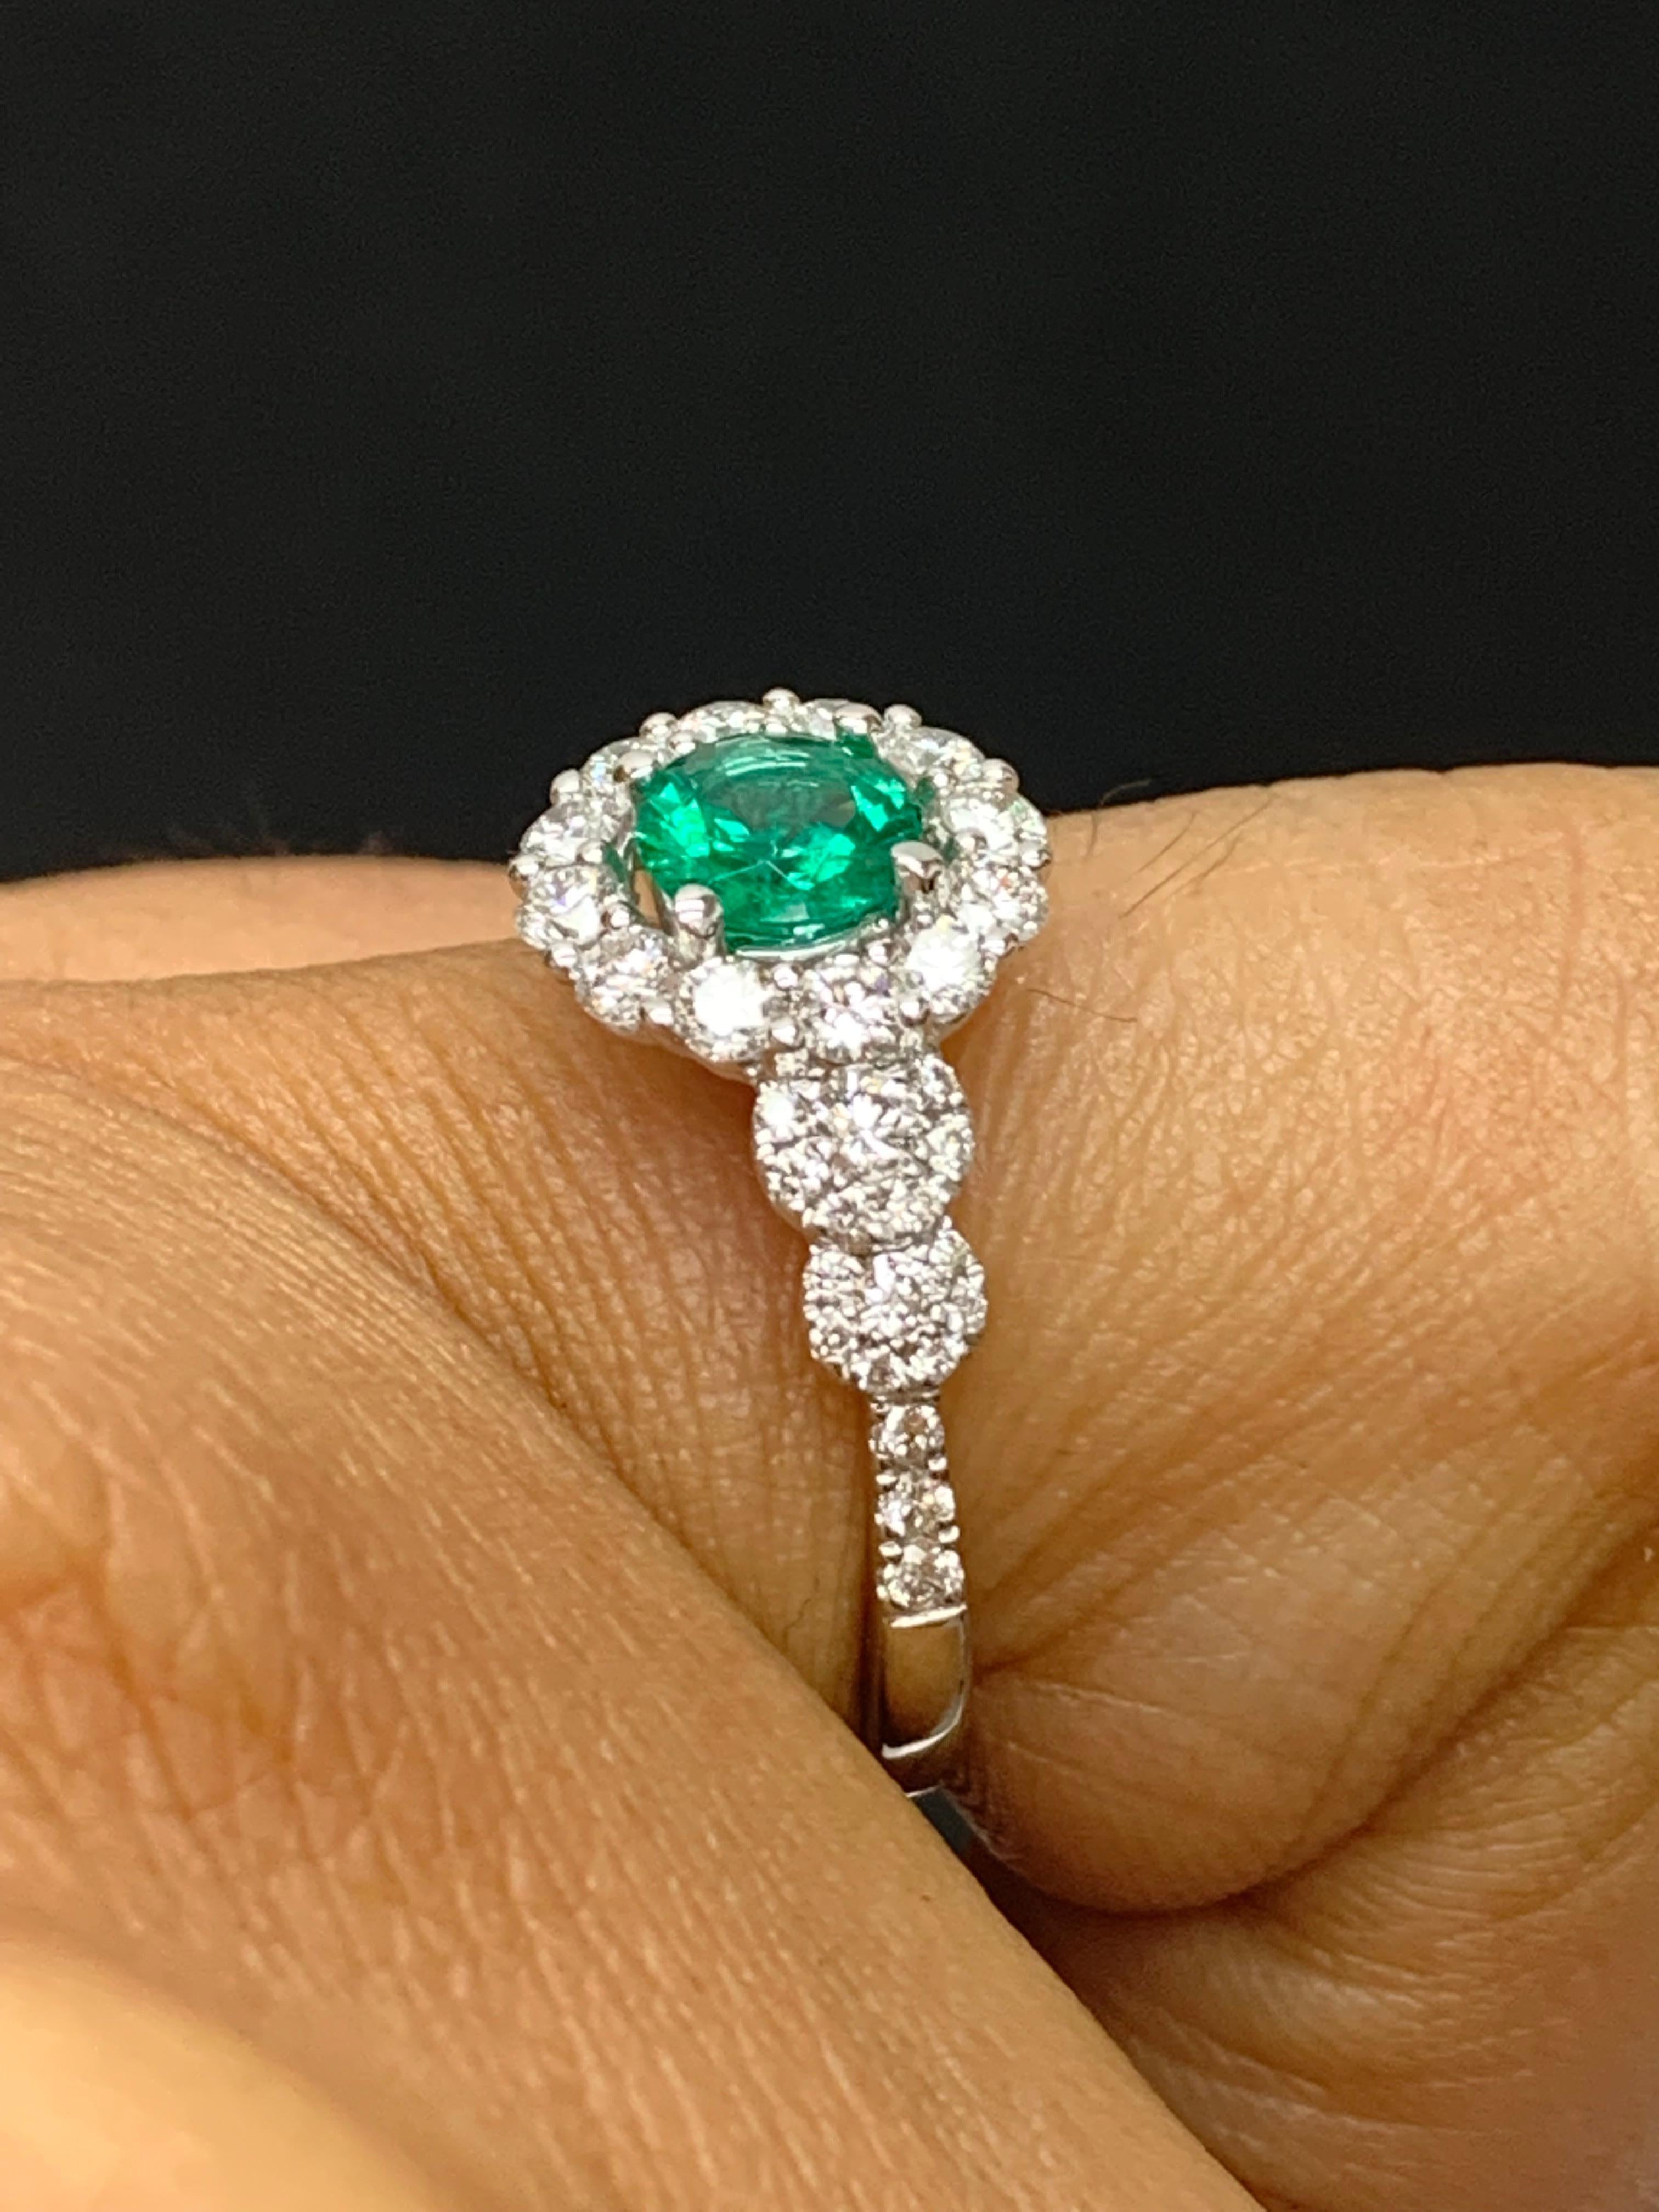 Women's 0.62 Carat Round Cut Emerald and Diamond Fashion Ring in 18k White Gold For Sale